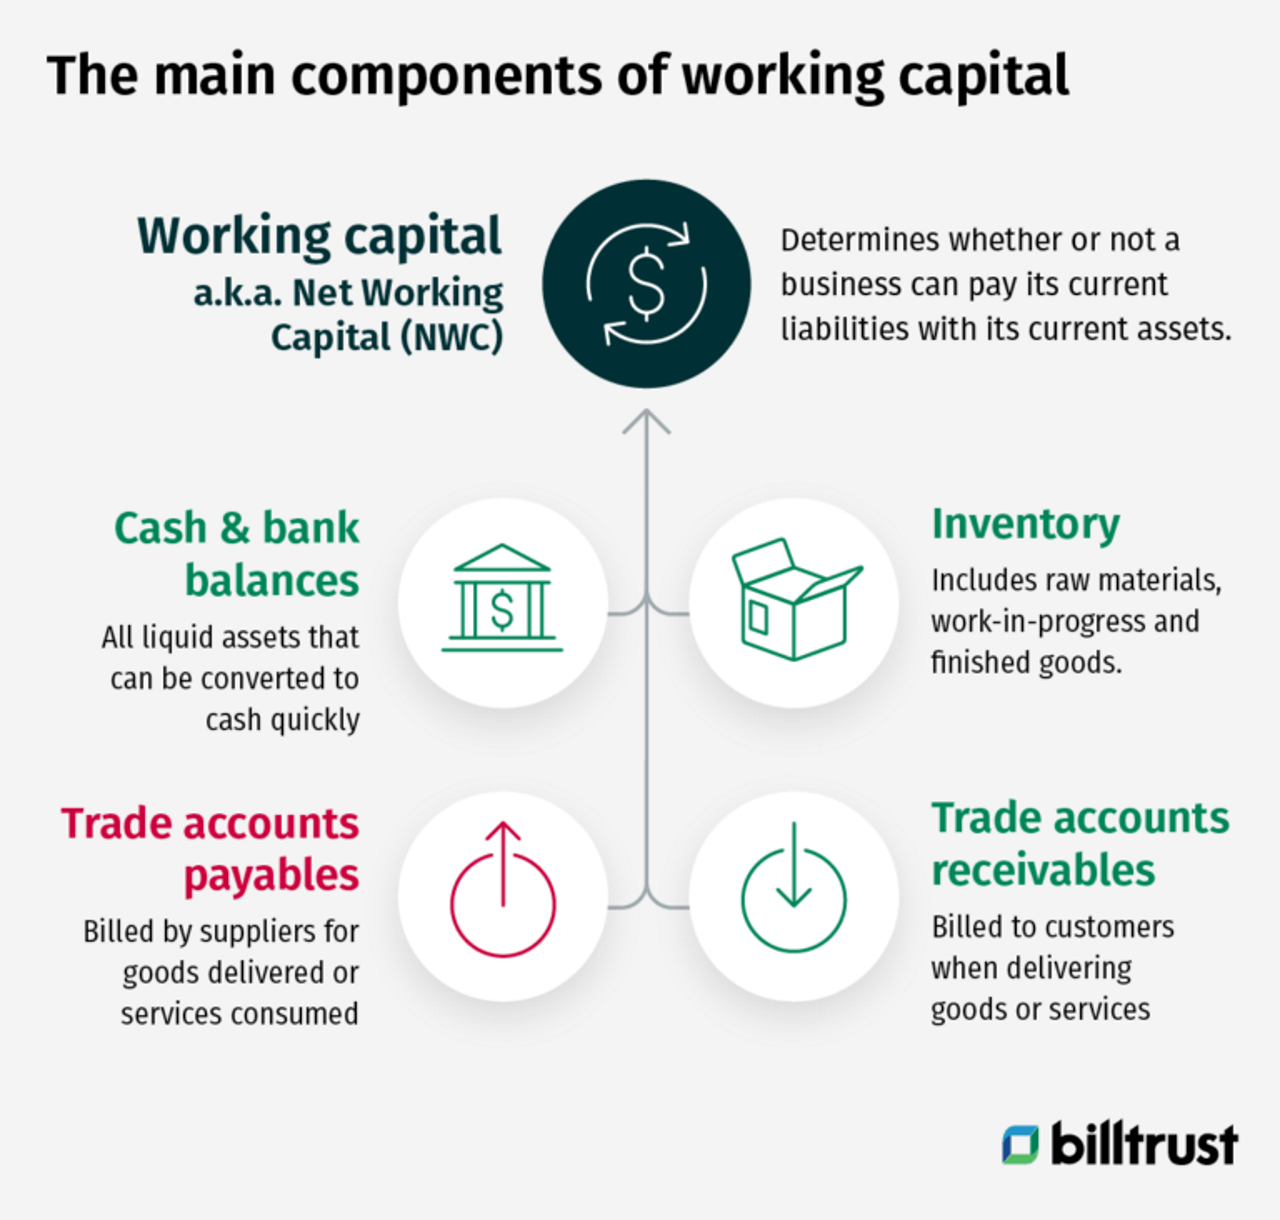 the main components of working capital: cash and bank balances, trade AP, inventory and trade AR